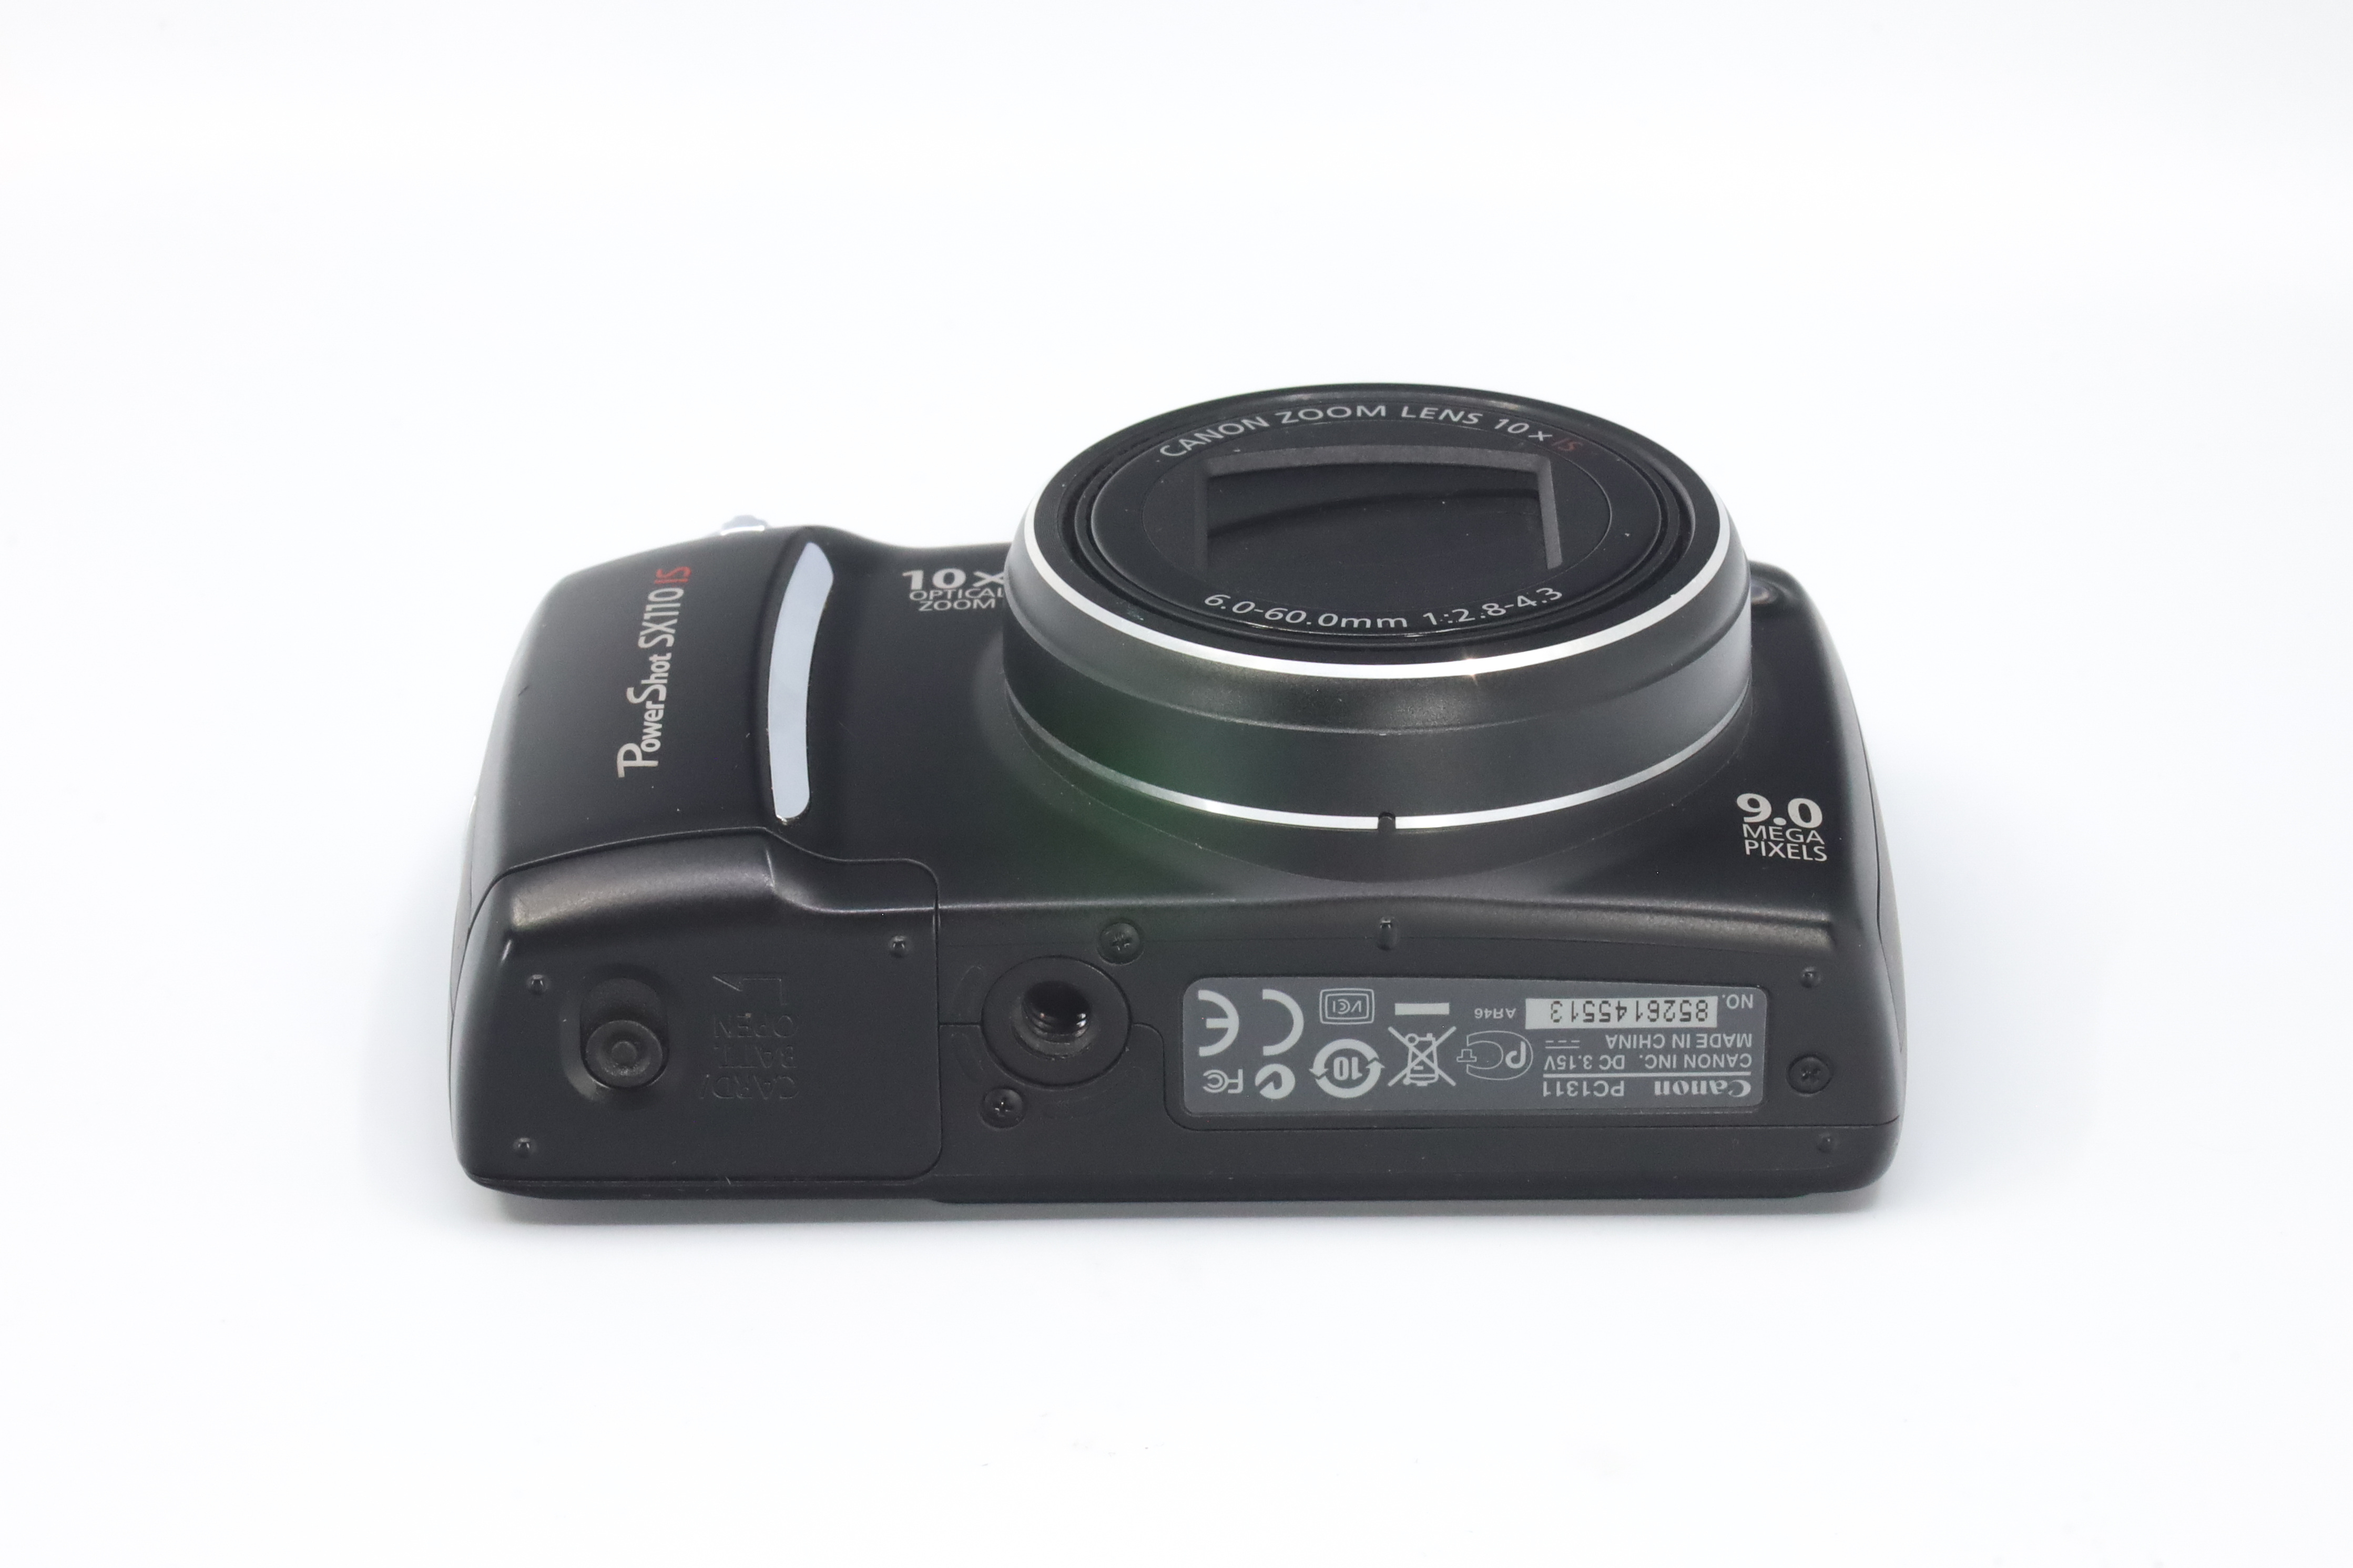 Canon SX110 IS 8526145513 1